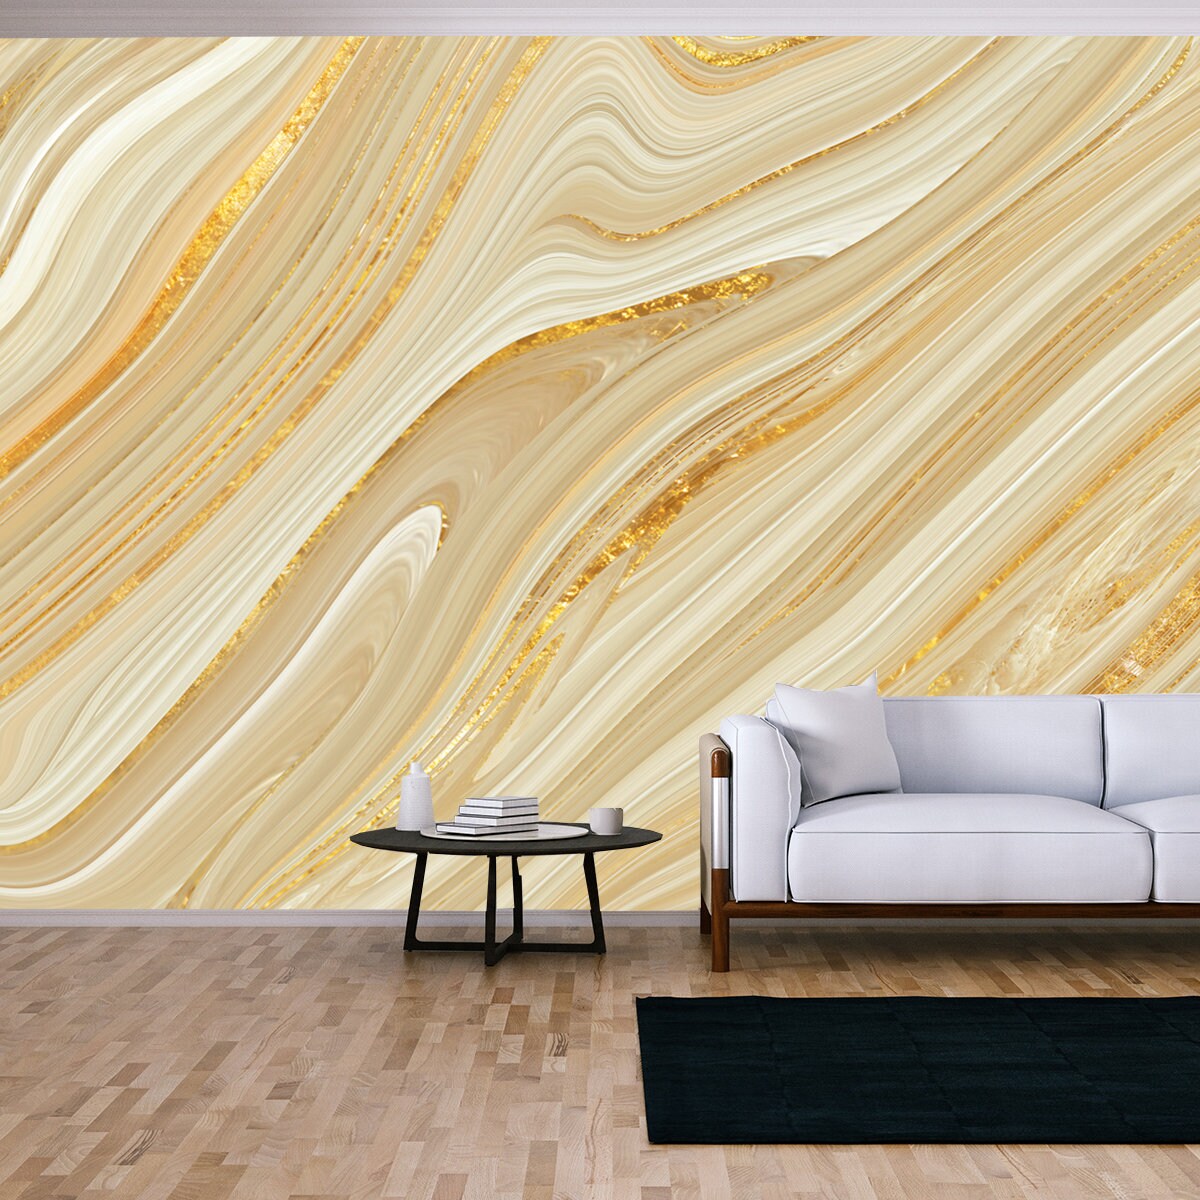 Monocolor Alcohol Ink Marbling Background. Liquid Waves and Stains. Acrylic and Oil Paint Flow Monochrome Contemporary Wallpaper Mural